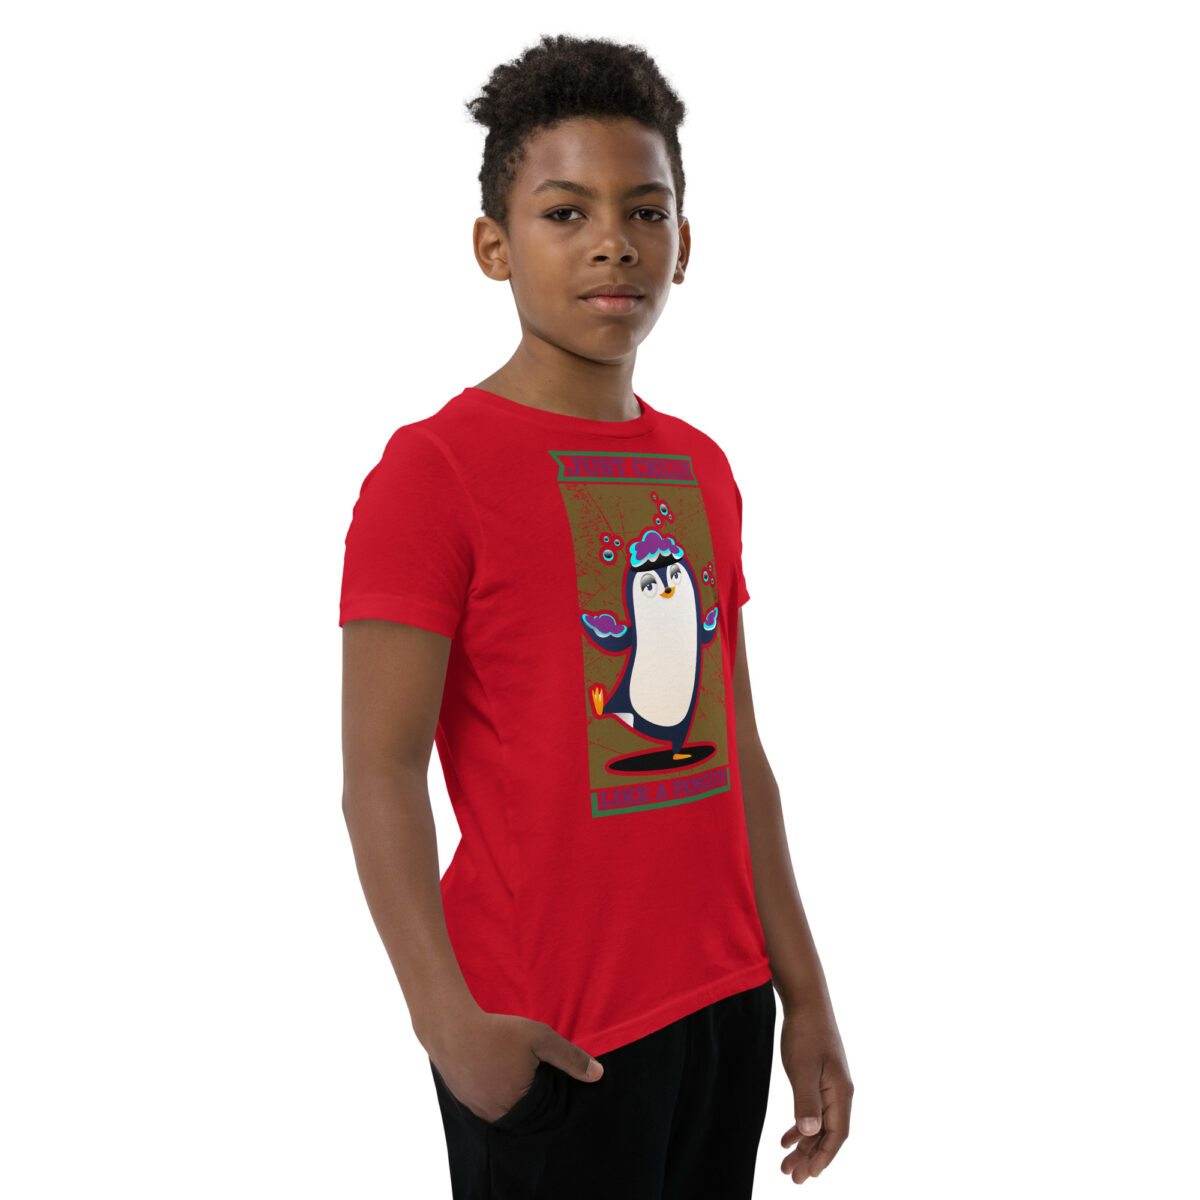 youth staple tee red right front 64675e29c2e85